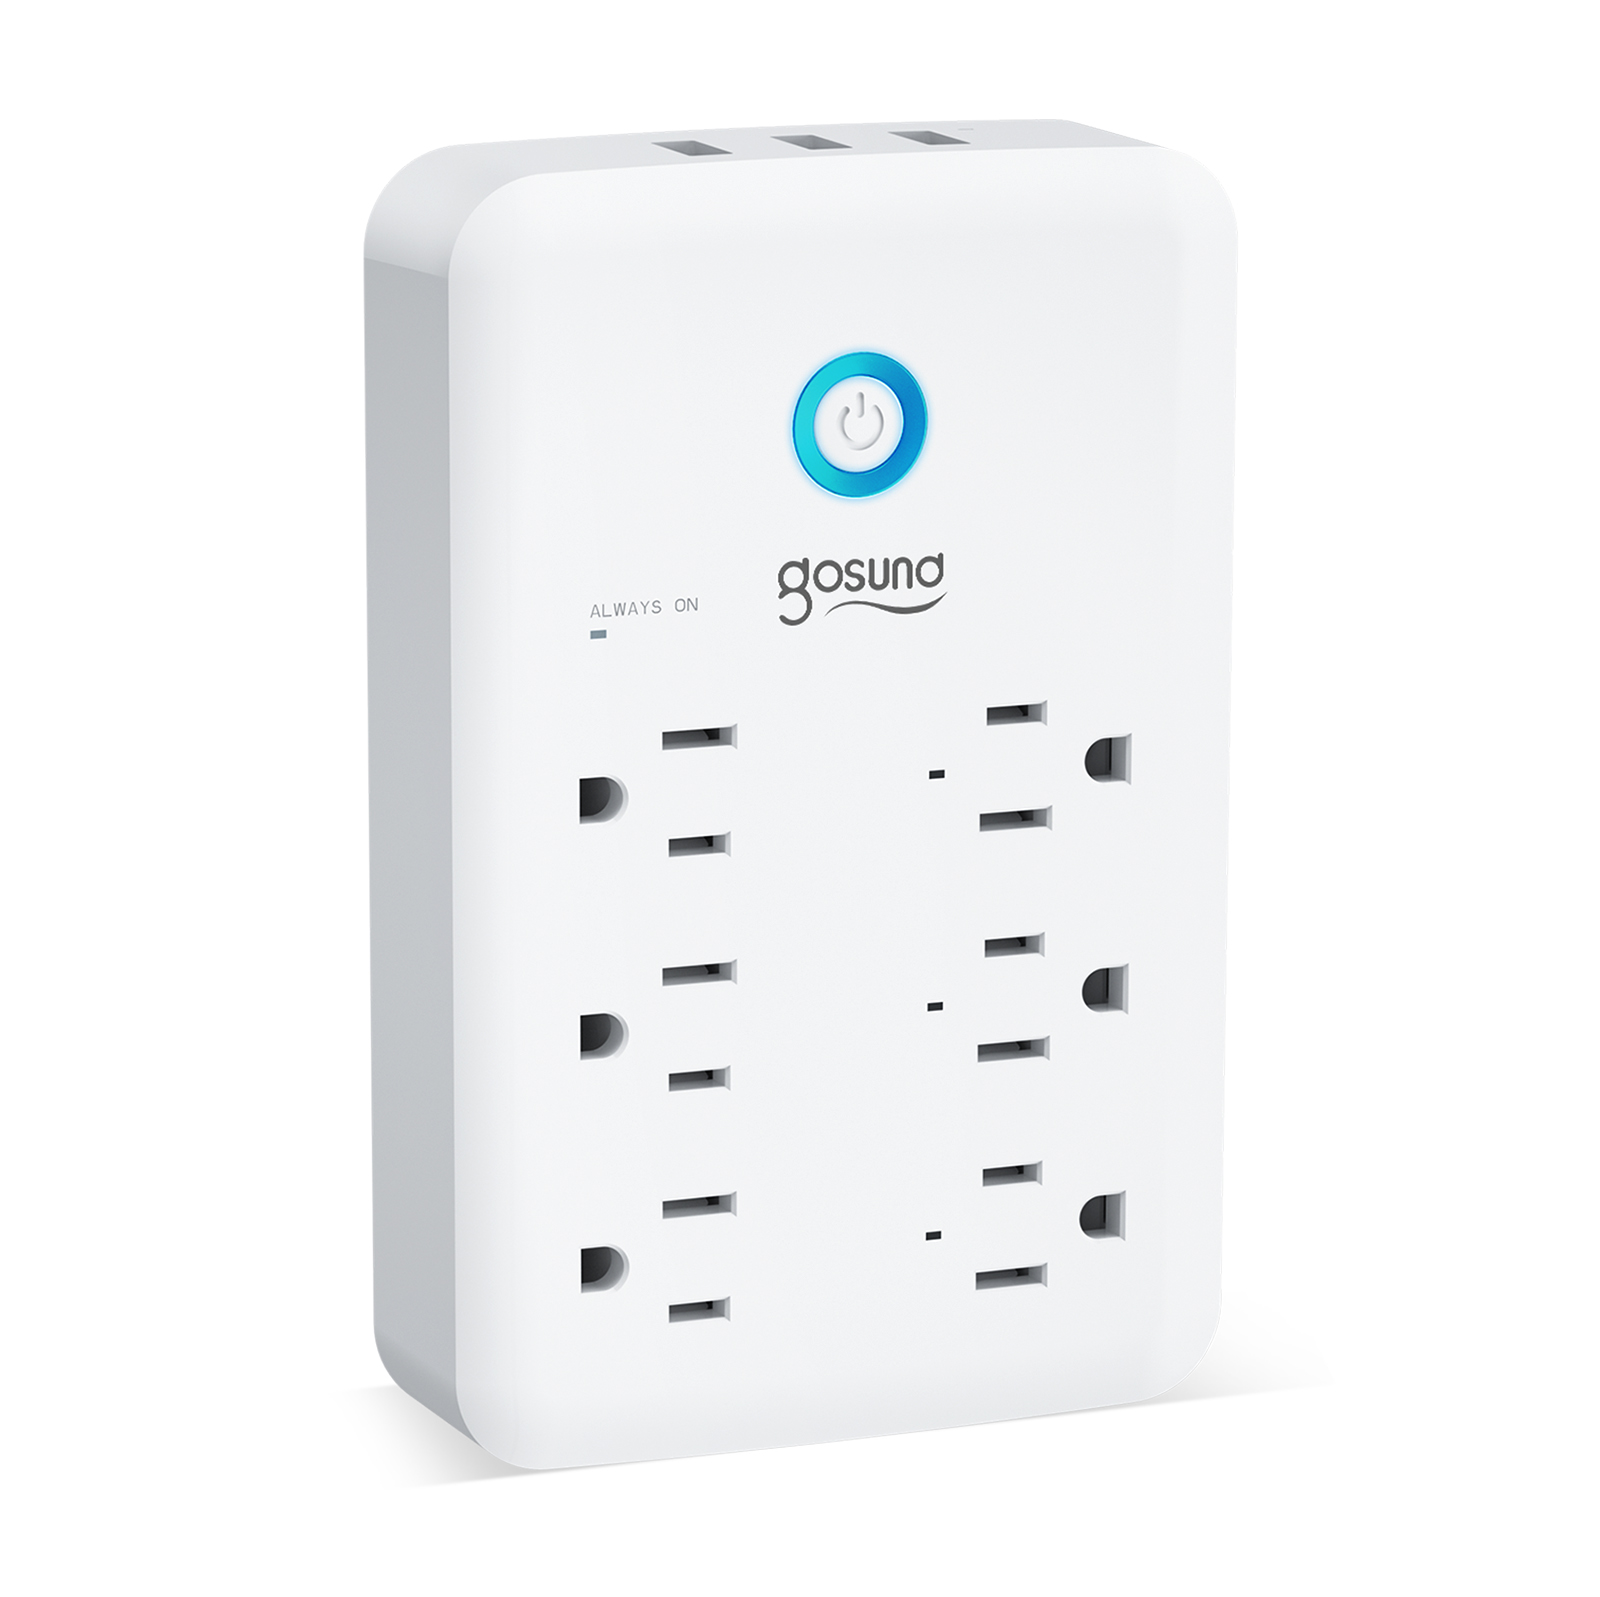 Smart Plug Gosund Wifi Dual Extender Outlet Remote Control Works with Alexa  Google Assistant 2-Pack 